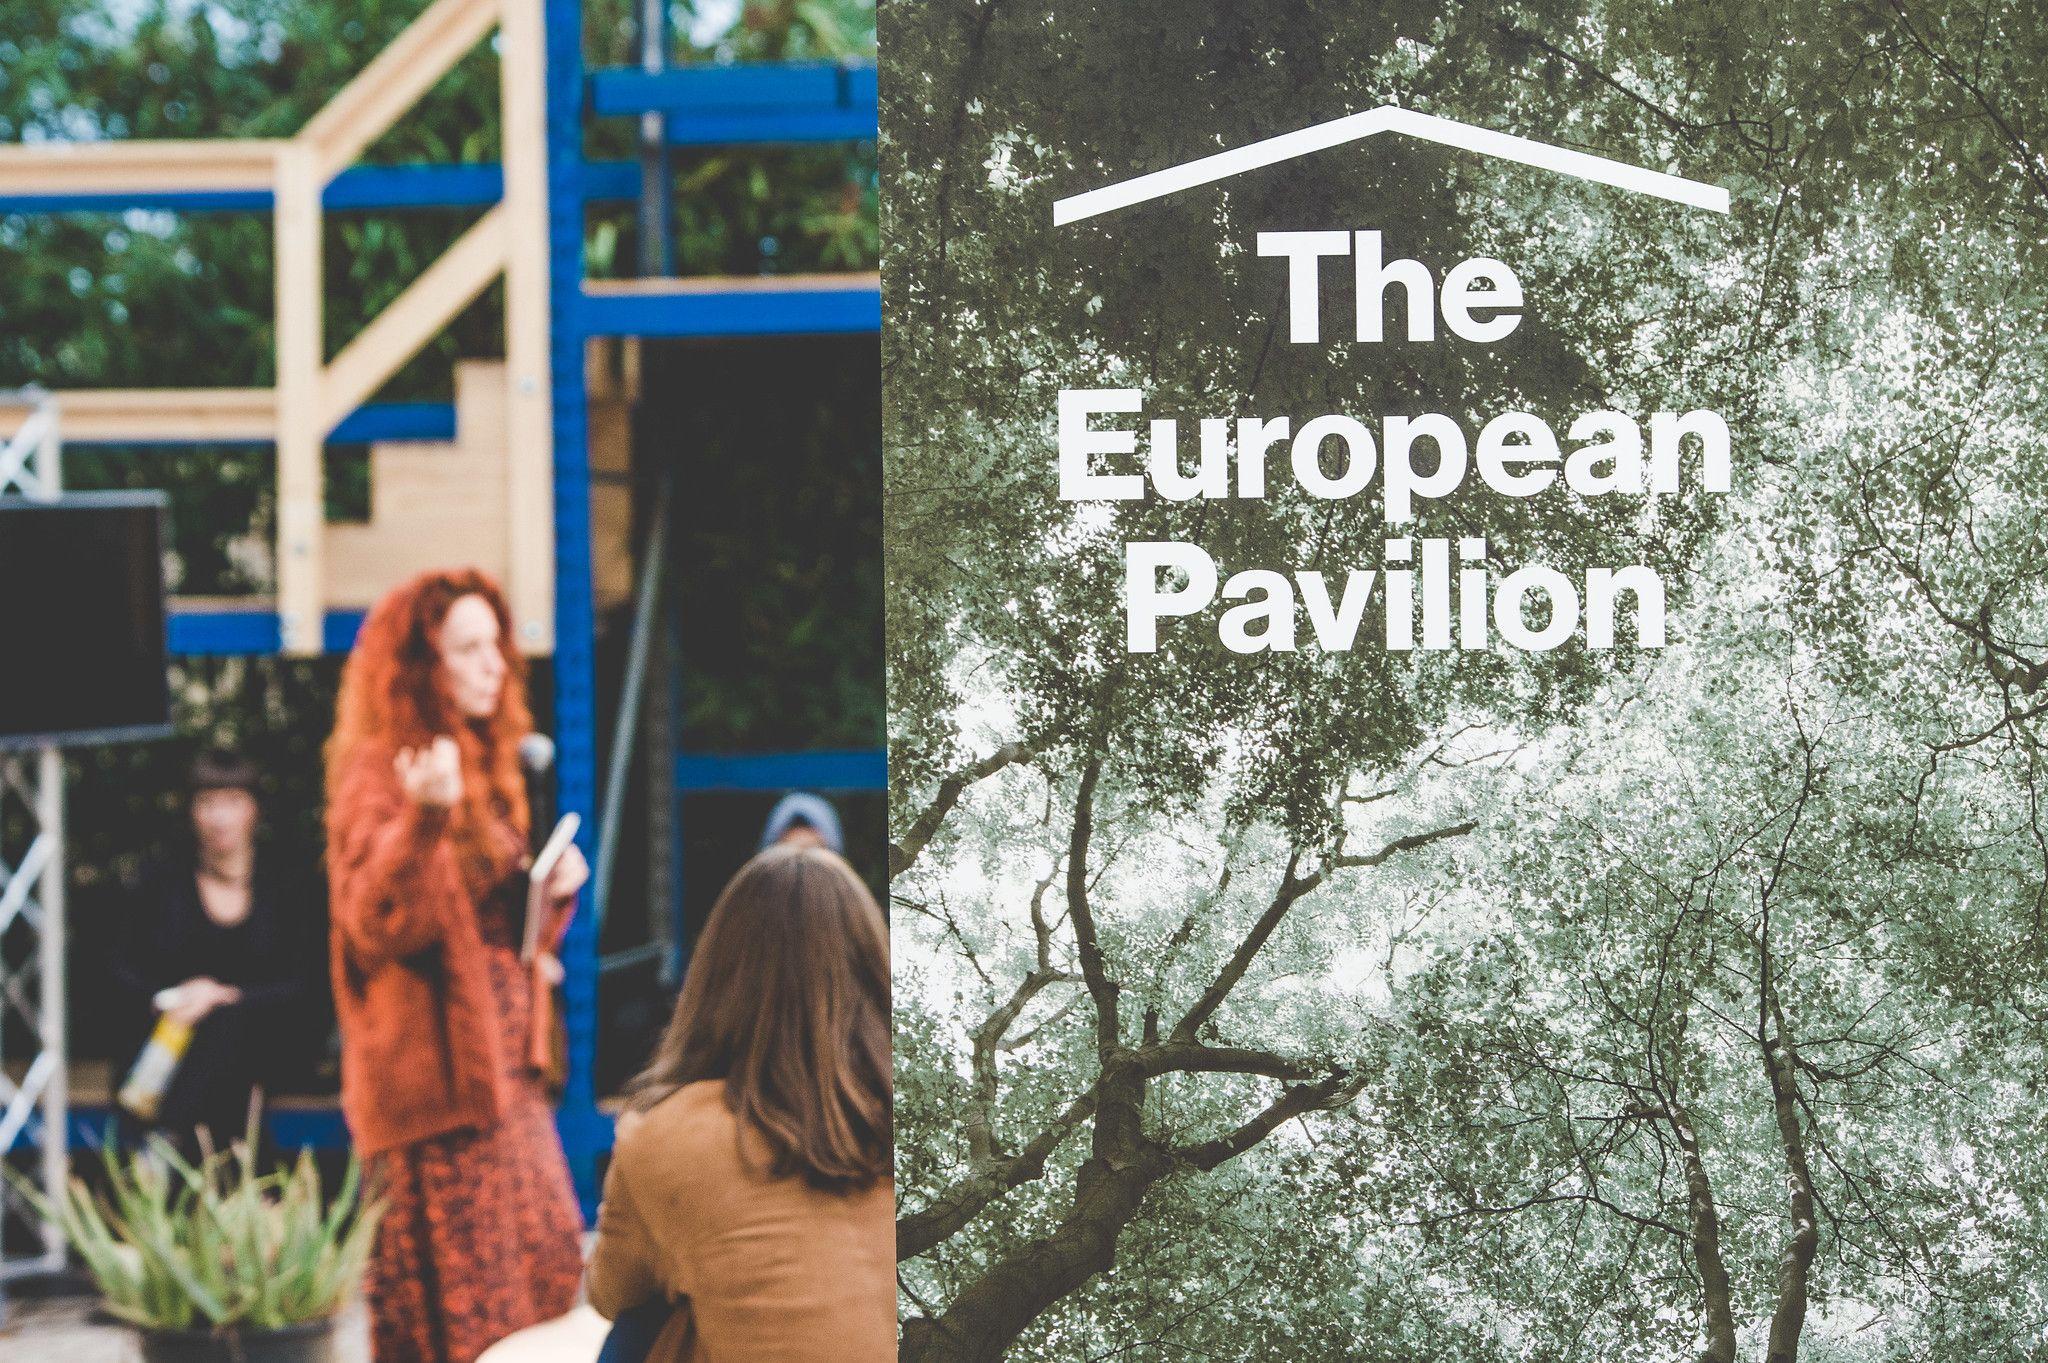 A Picture of a roll up with the inscription "European Pavilion" is pictured. In the background a person is speeking.